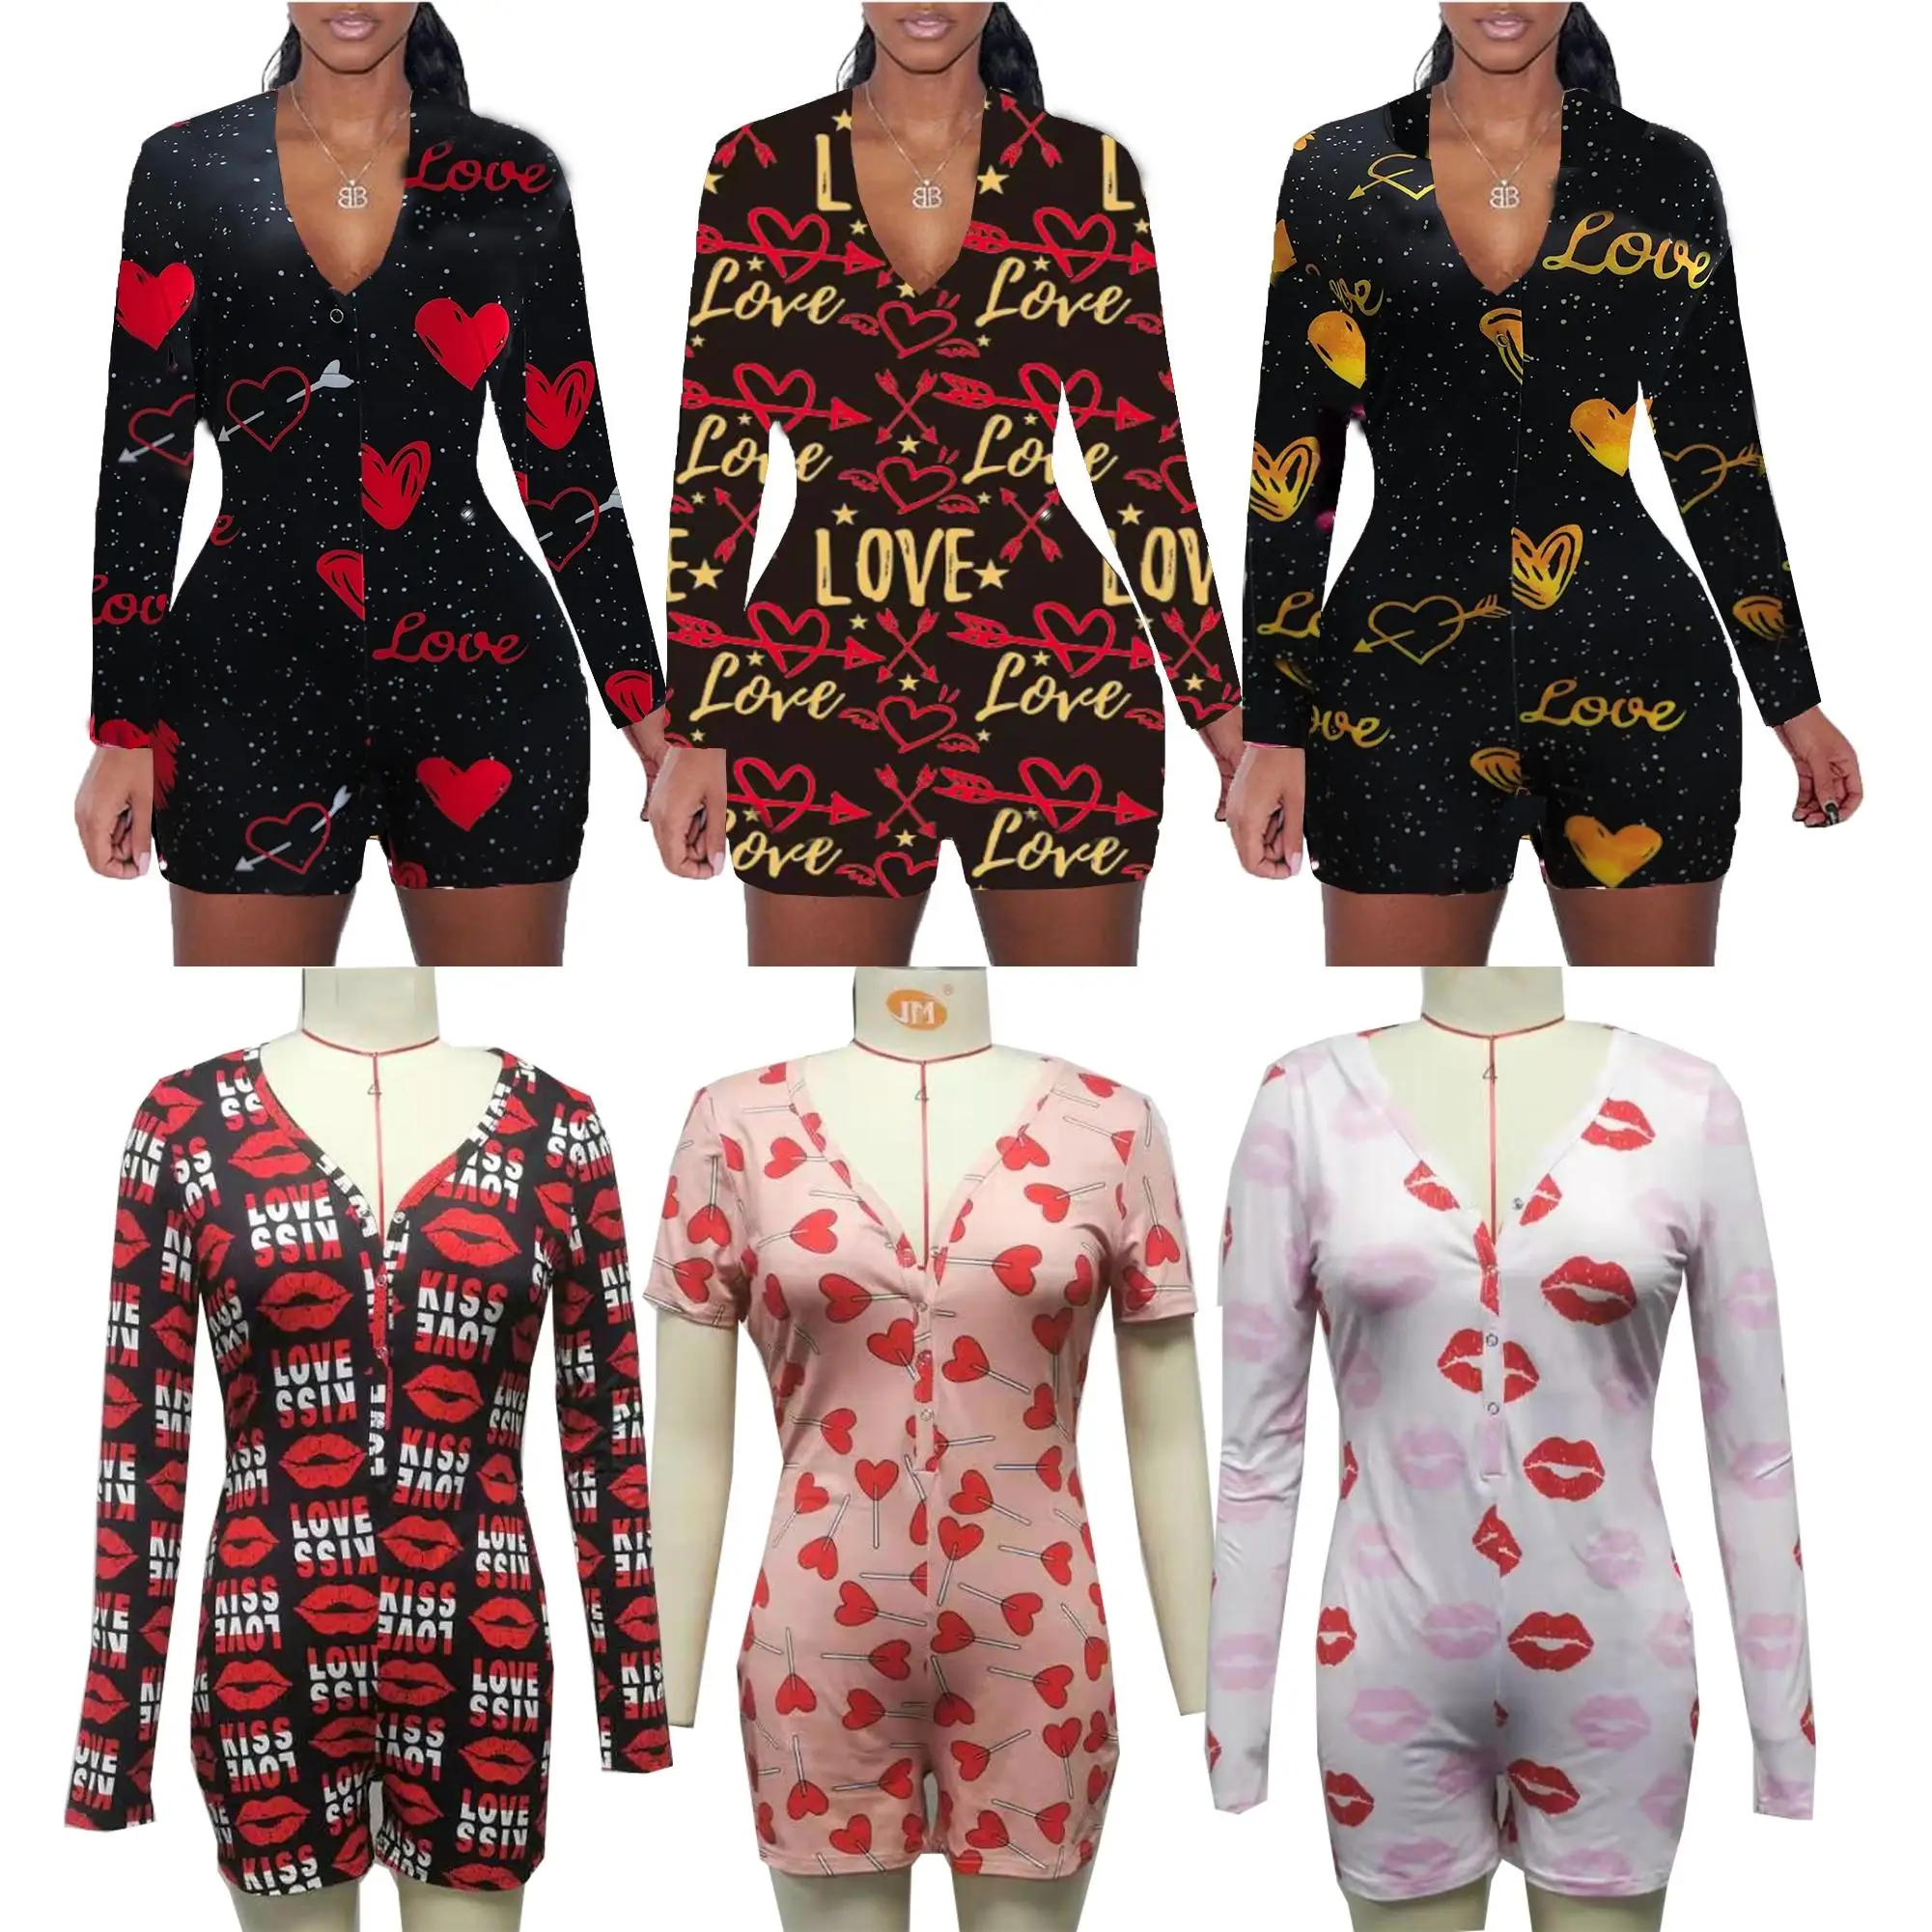 

2022 valentines onesies plus size short sleeve nightwear onesie with butt flap pajama sets for women, Customized color